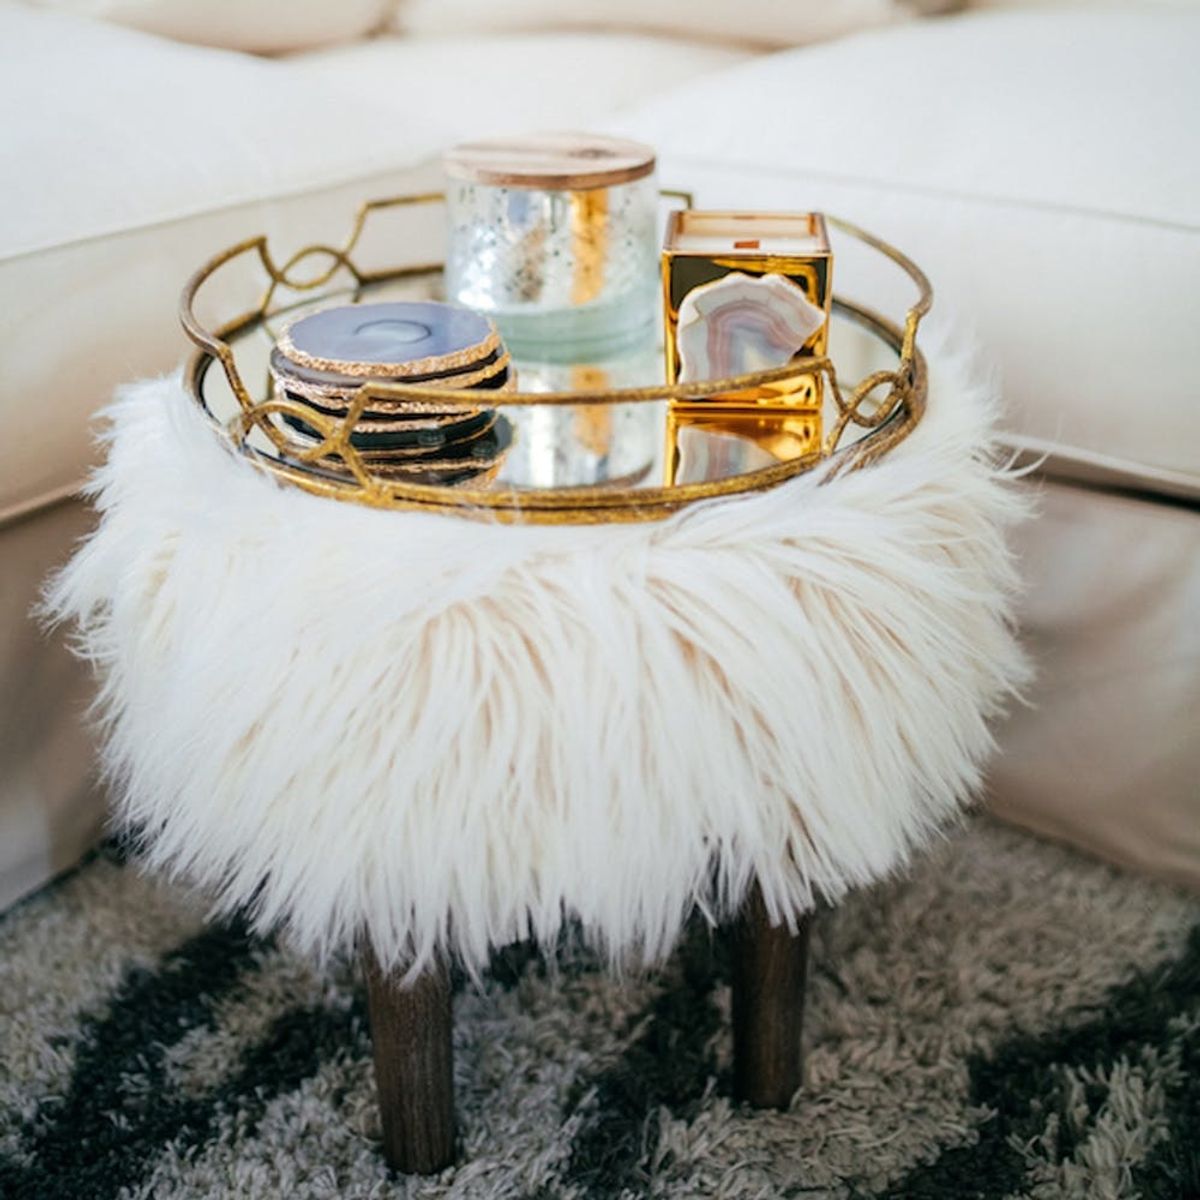 16 Times the Faux Fur Furniture Trend Made Us Swoon